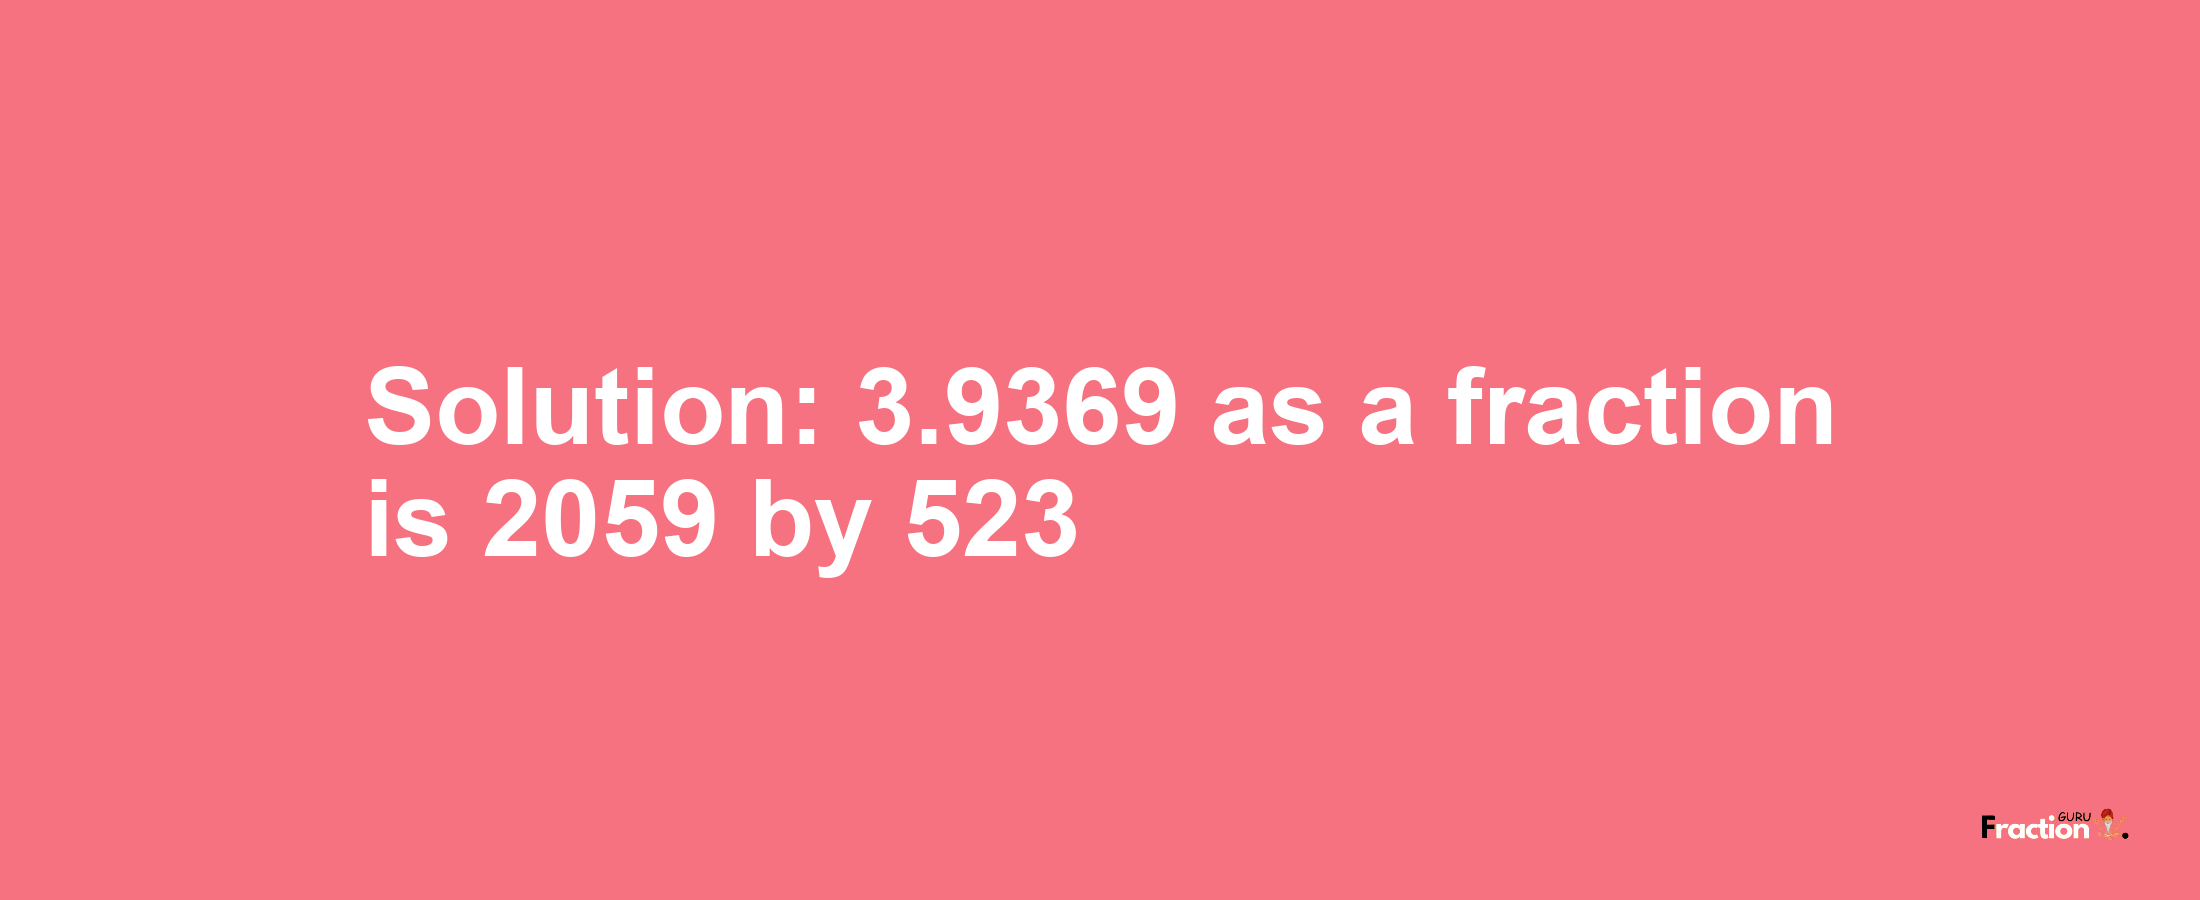 Solution:3.9369 as a fraction is 2059/523